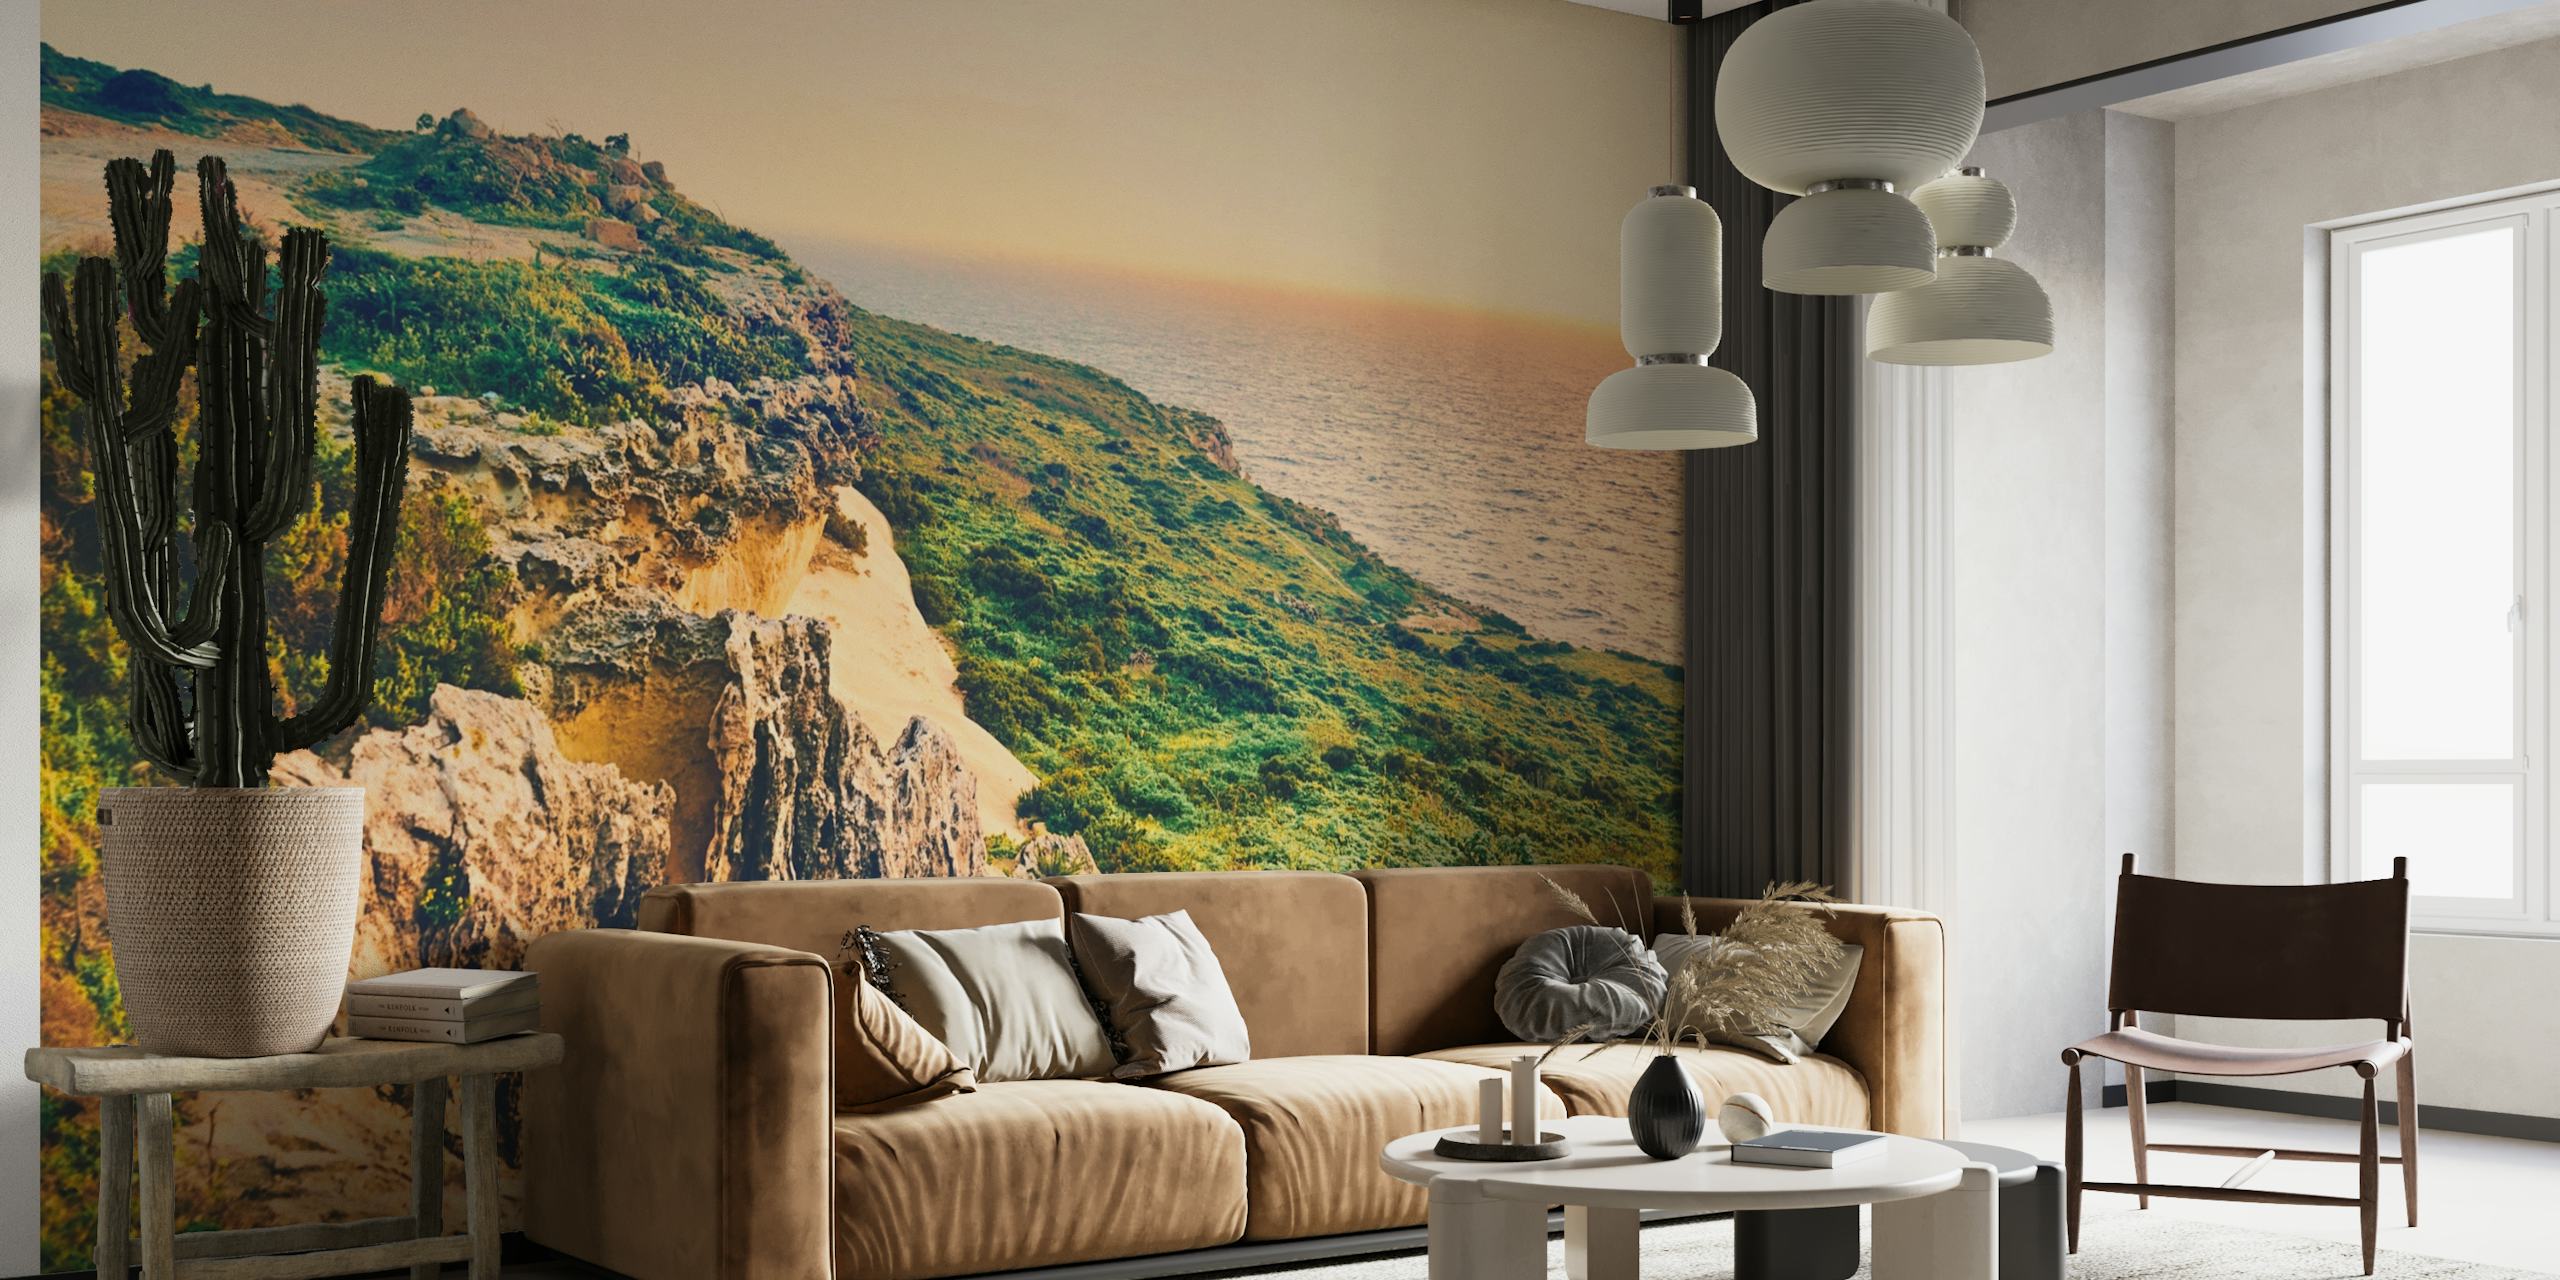 Ocean Sunset wall mural depicting the sun setting over a coastal landscape with cliffs and lush greenery